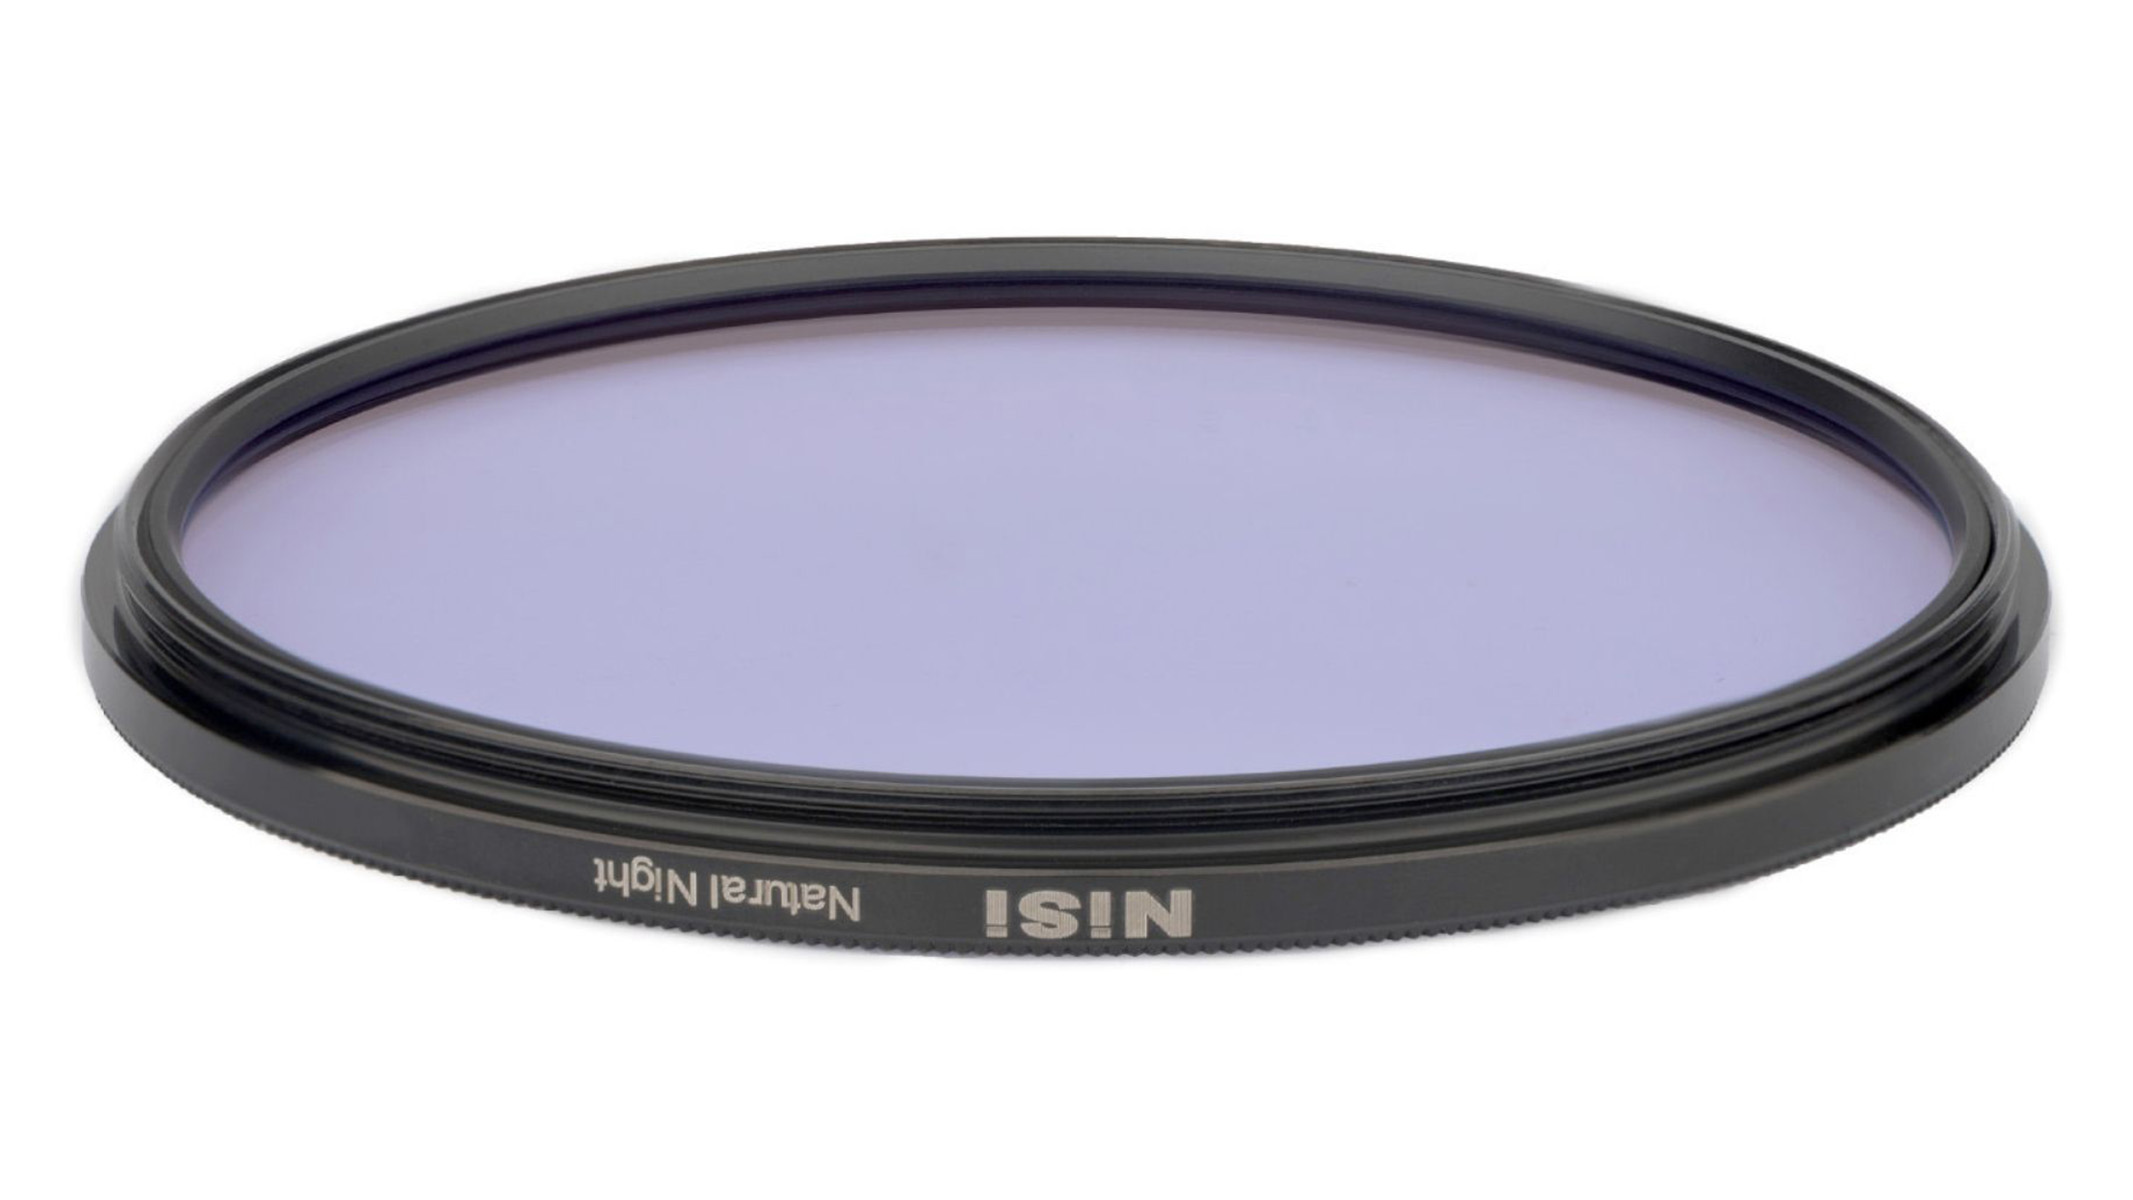 A product photo of the Nisi filter